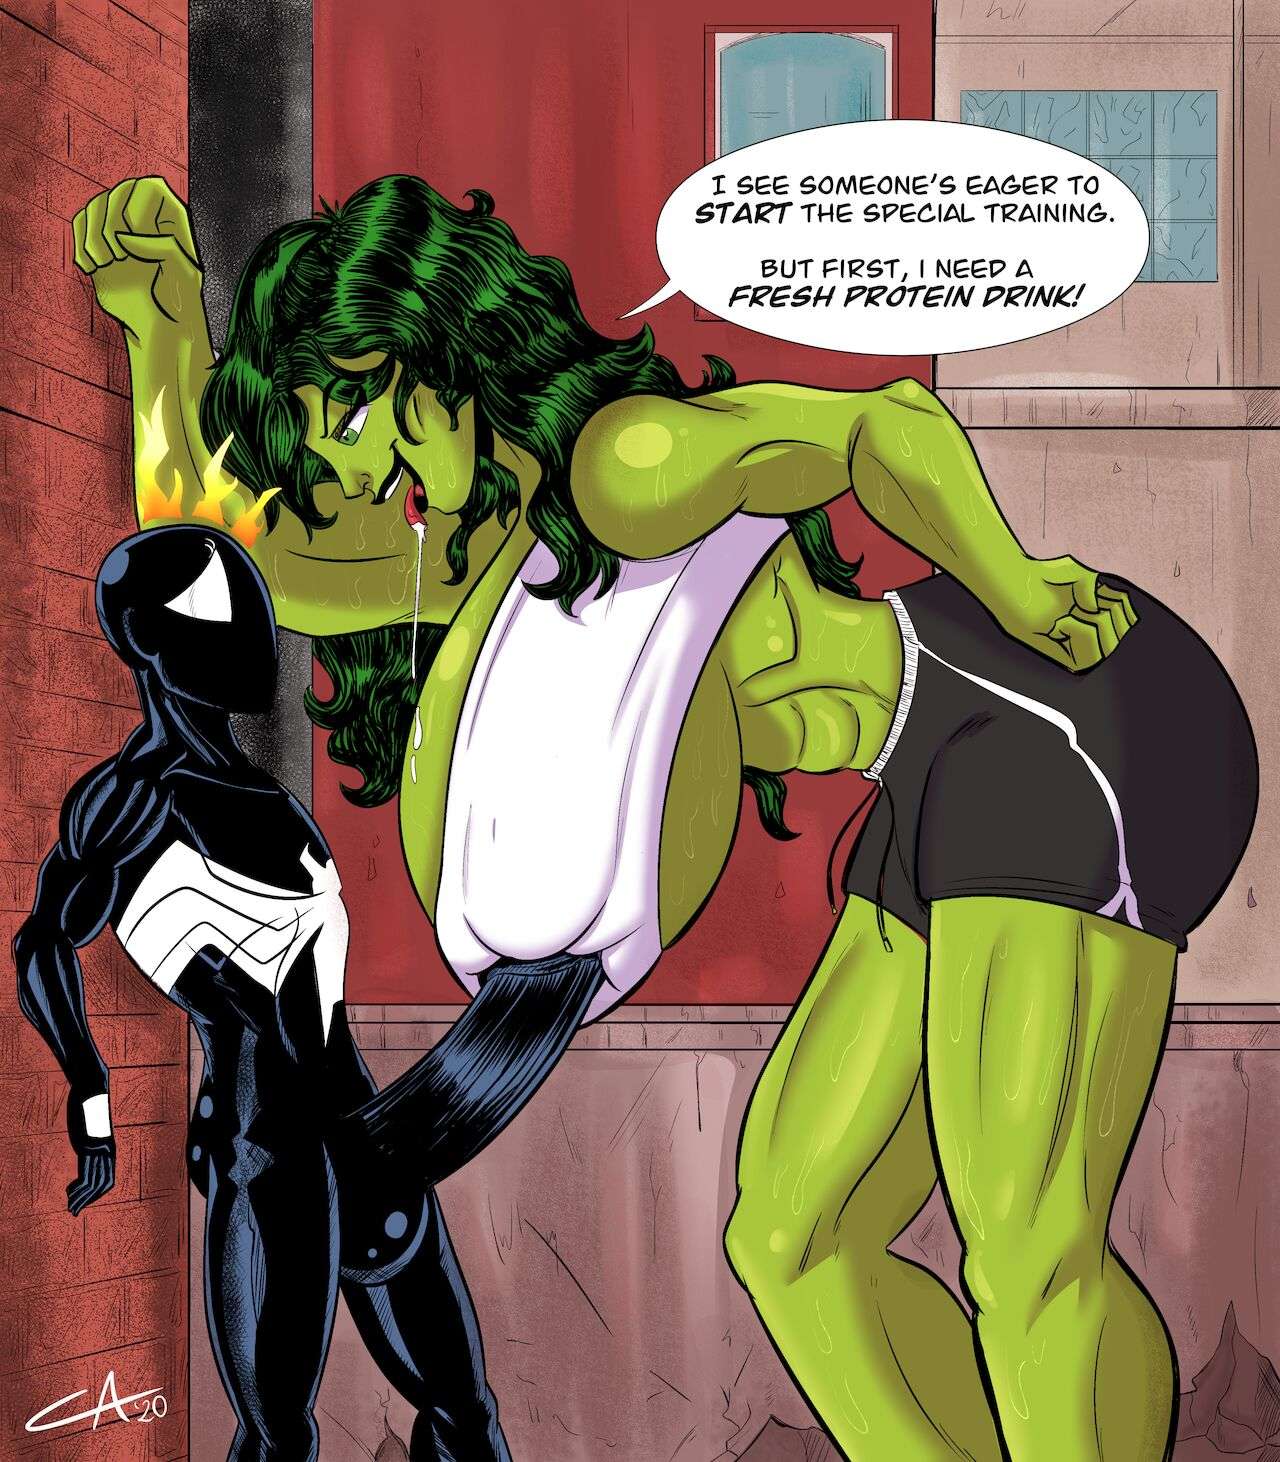 Special She-Training (Marvel) Ameizing Lewds - Comics Army